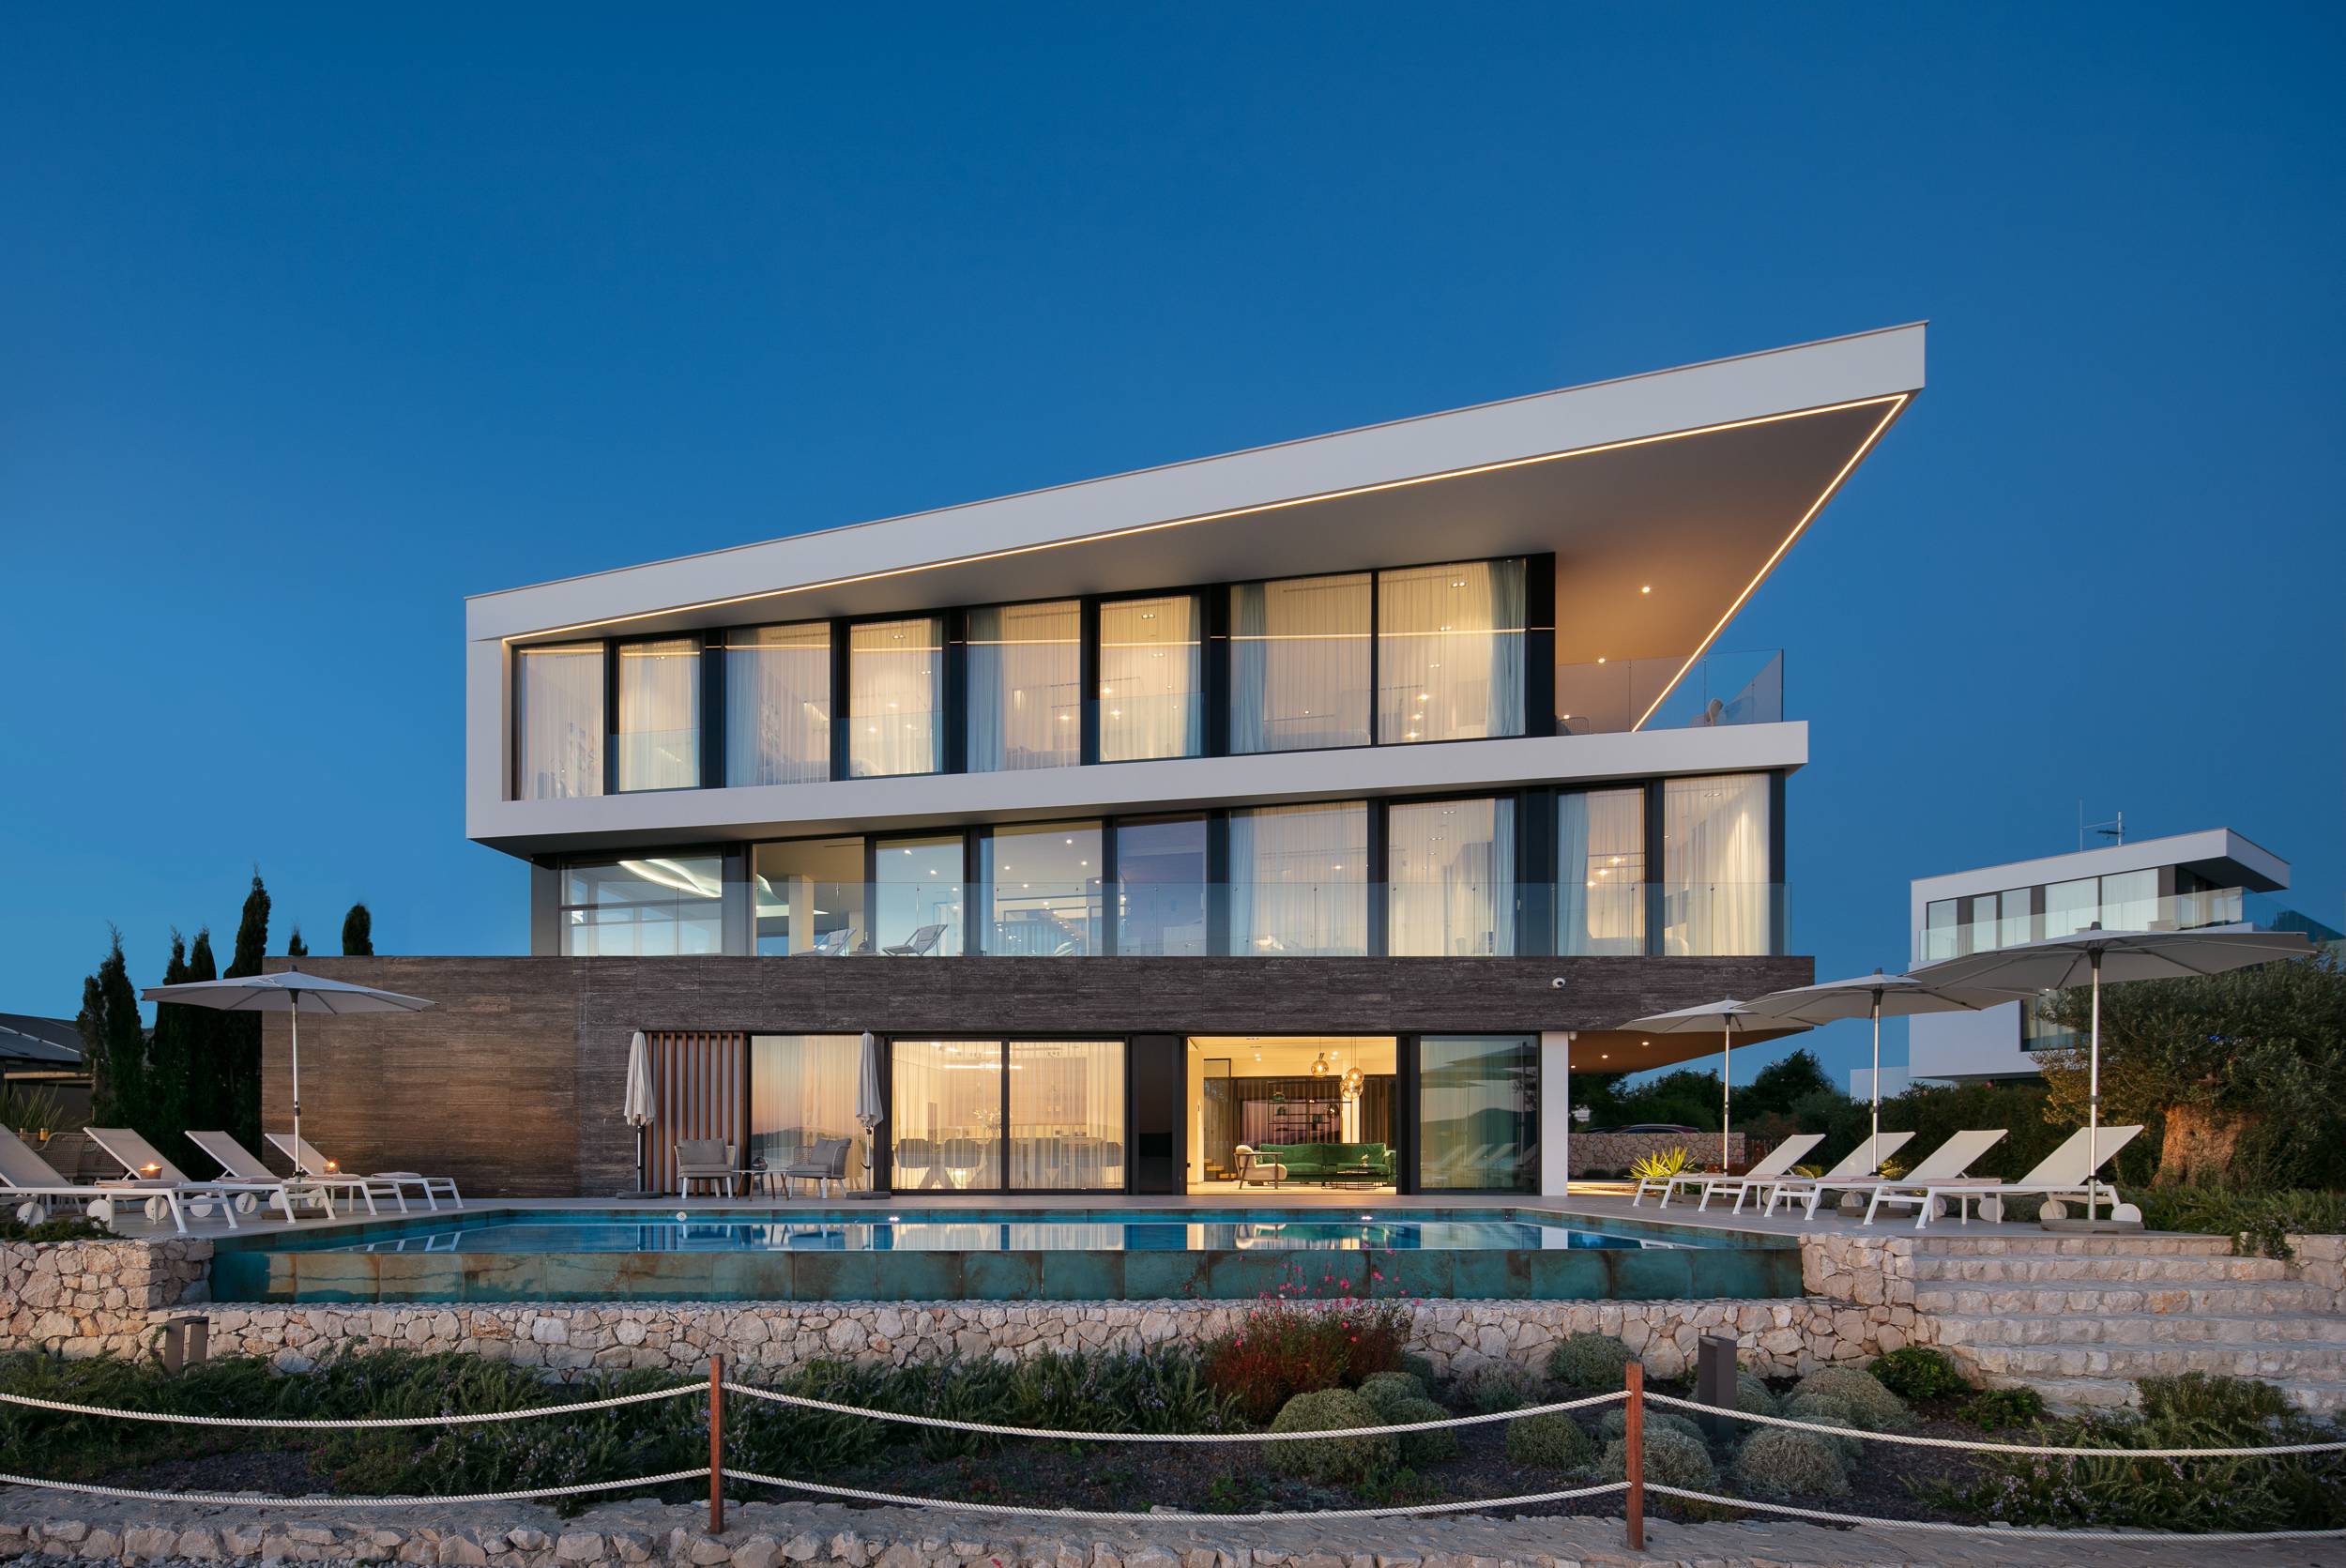 A house with glass walls and architecture that juts out at different angles. It has a pool and many poolside chairs.